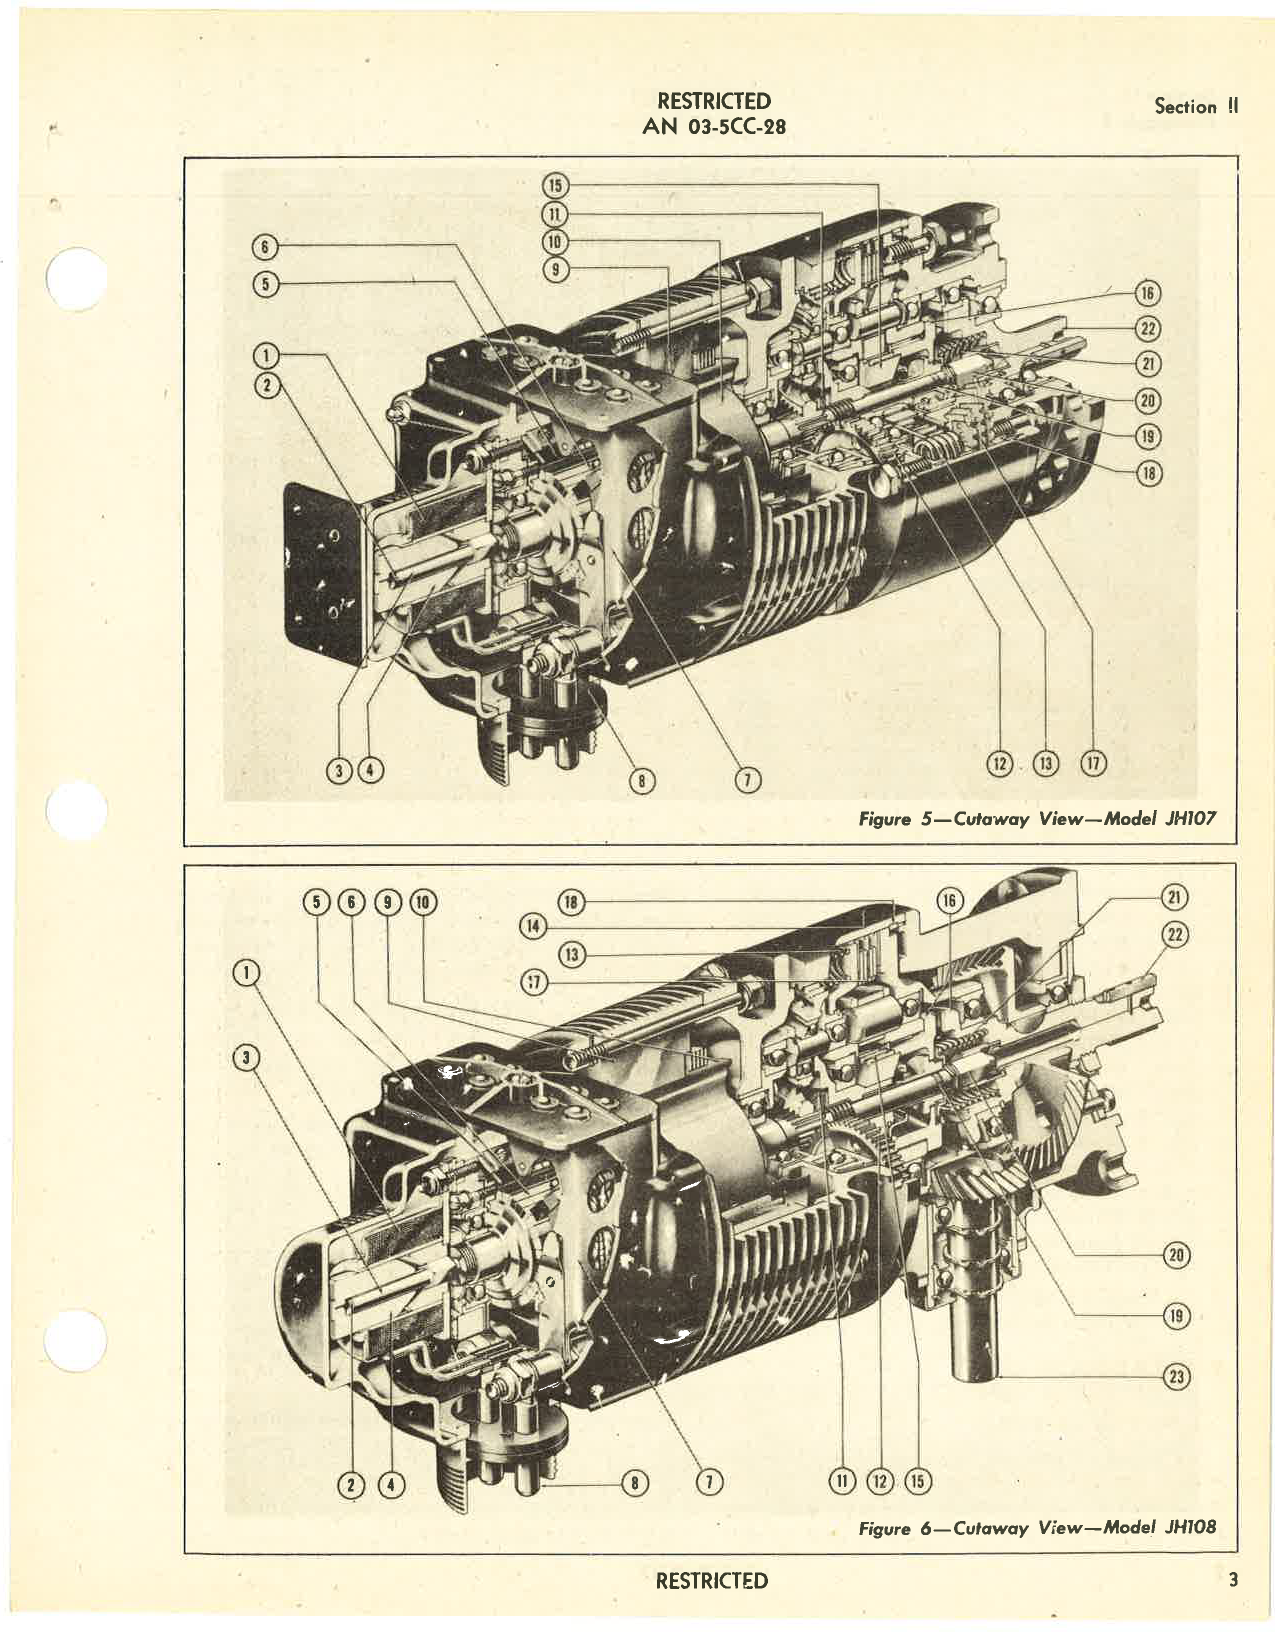 Sample page 7 from AirCorps Library document: Handbook of Instructions with Parts Catalog for Retracting Motors Models JH106, JH107, and JH108